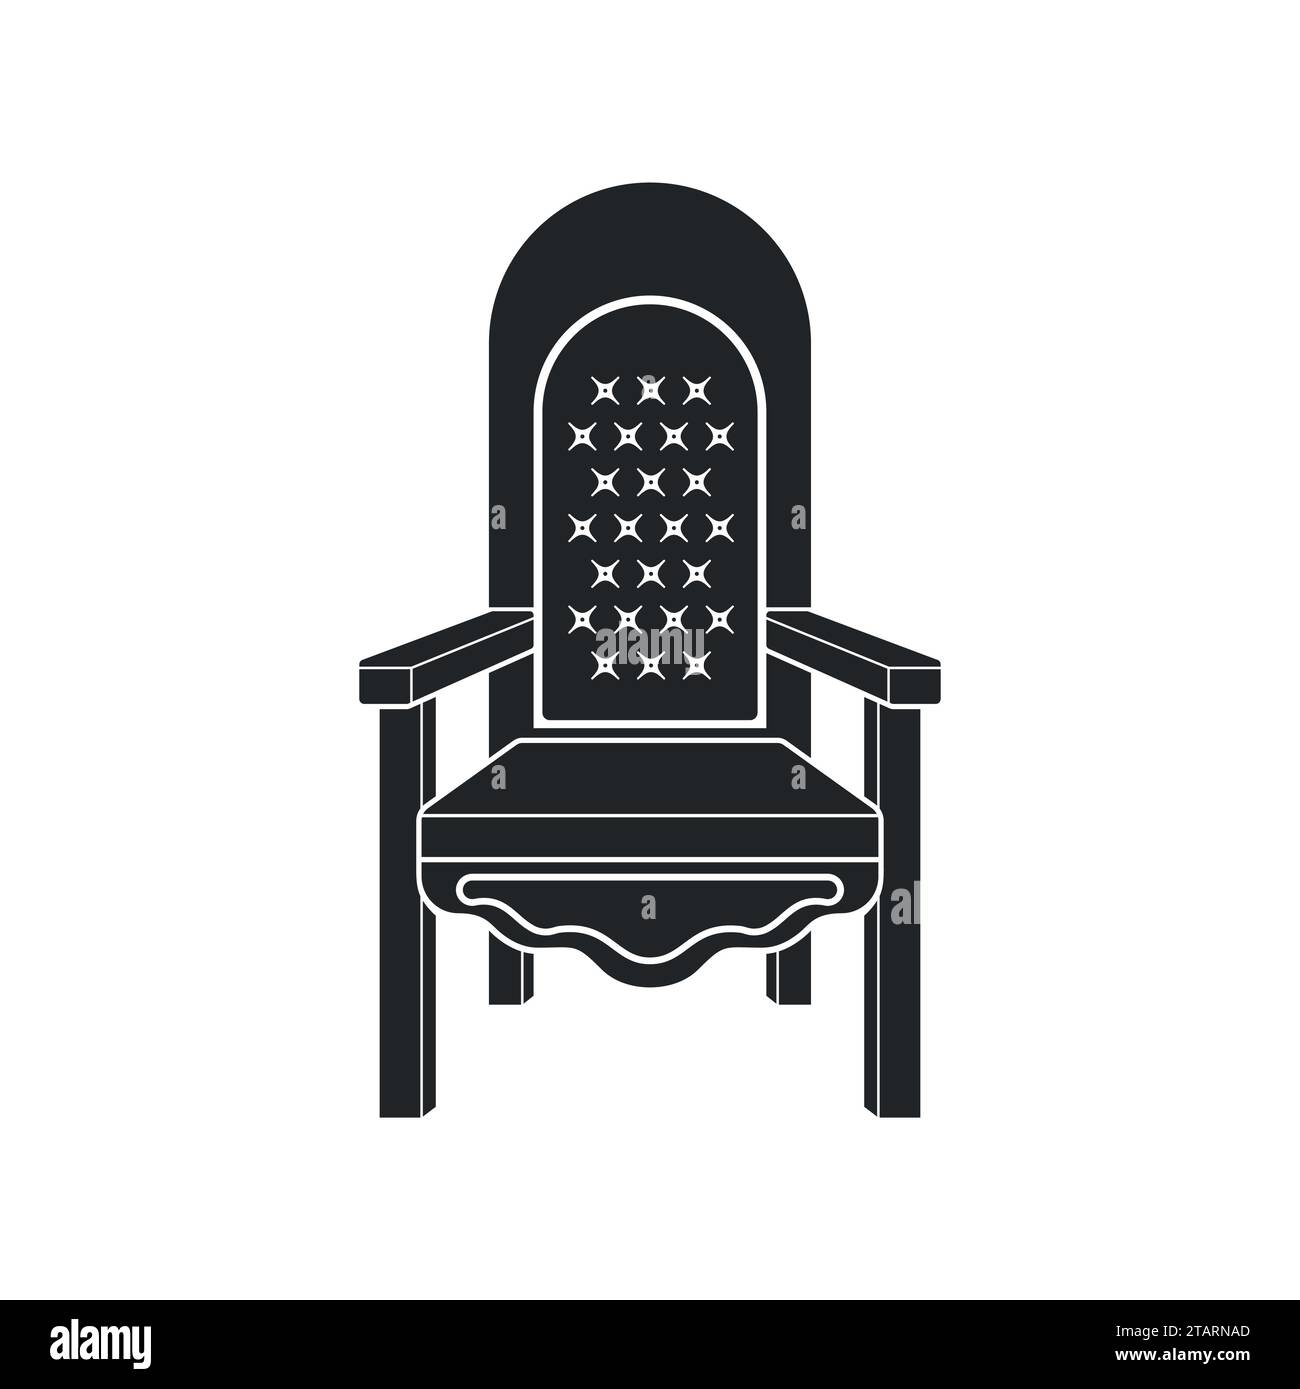 Royal throne icon. King throne or armchair icon in flat style isolated on white background. Vector illustration Stock Vector